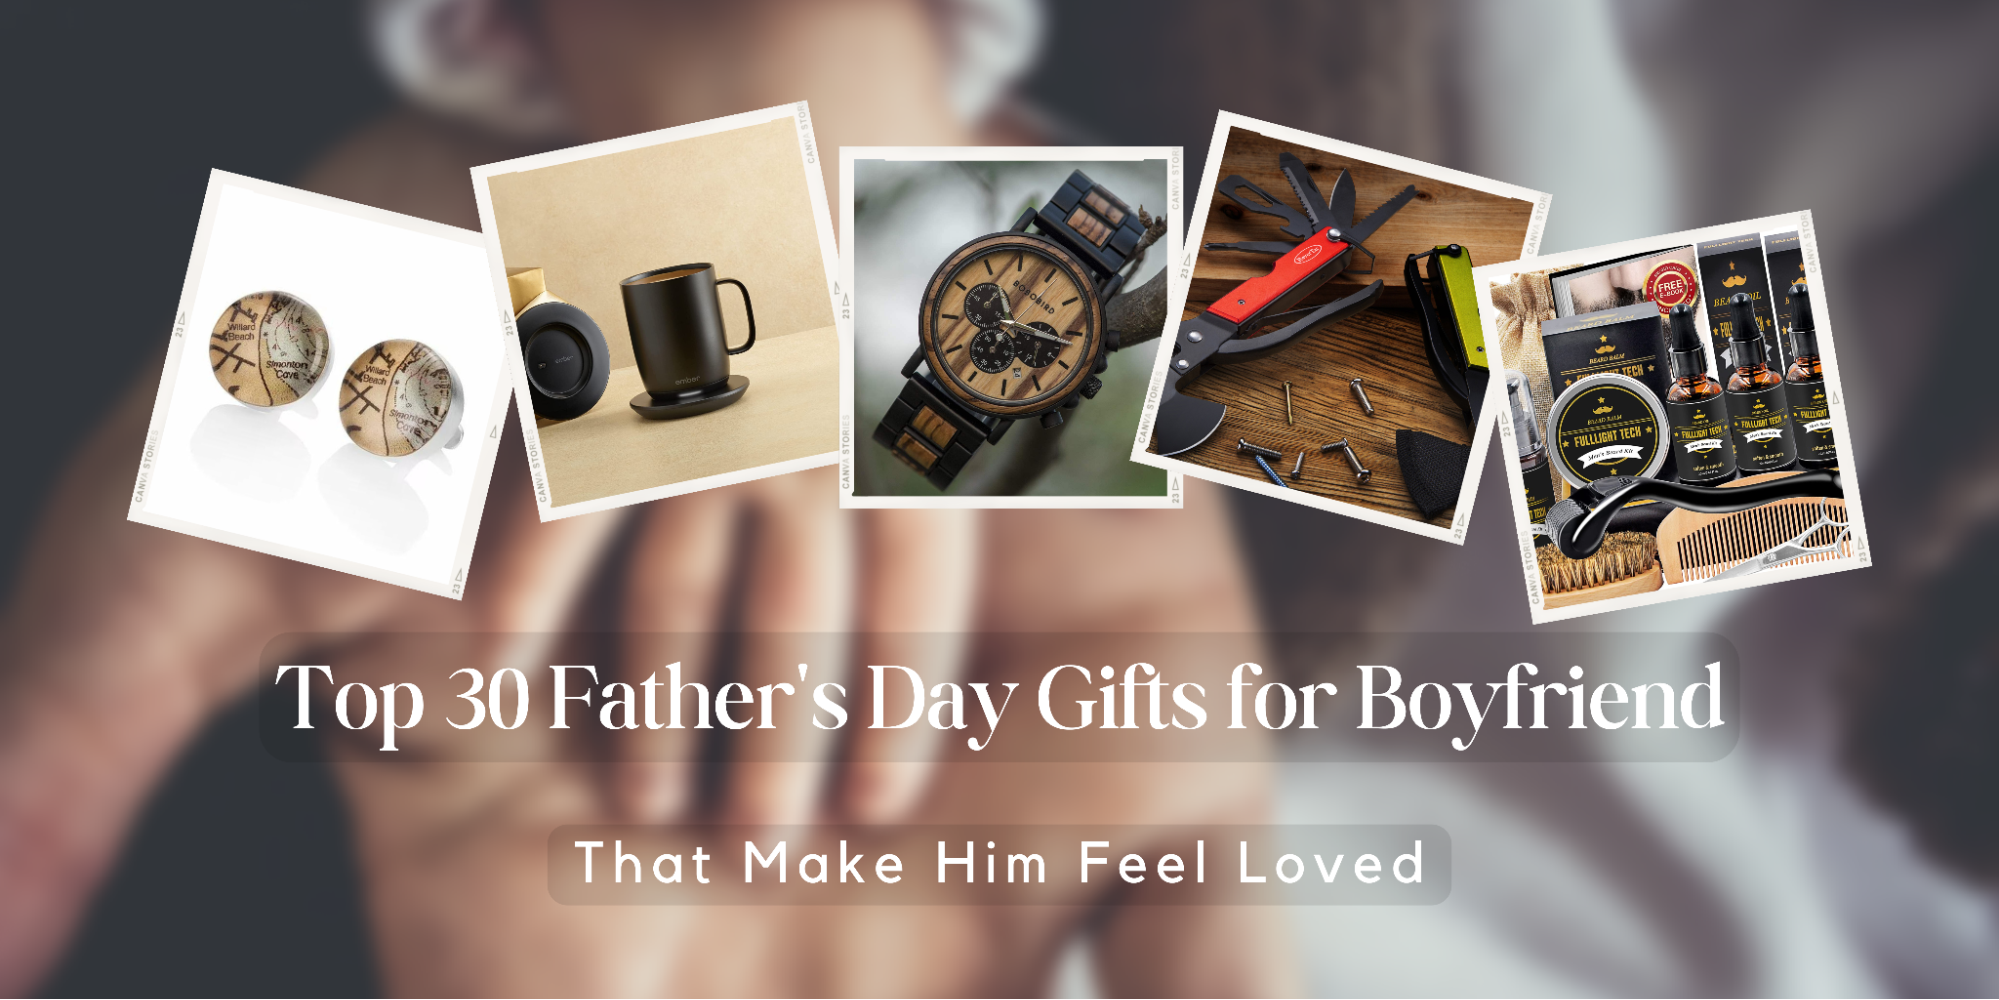 Top 30 Father's Day Gifts for Boyfriend that Make Him Feel Loved (2022)